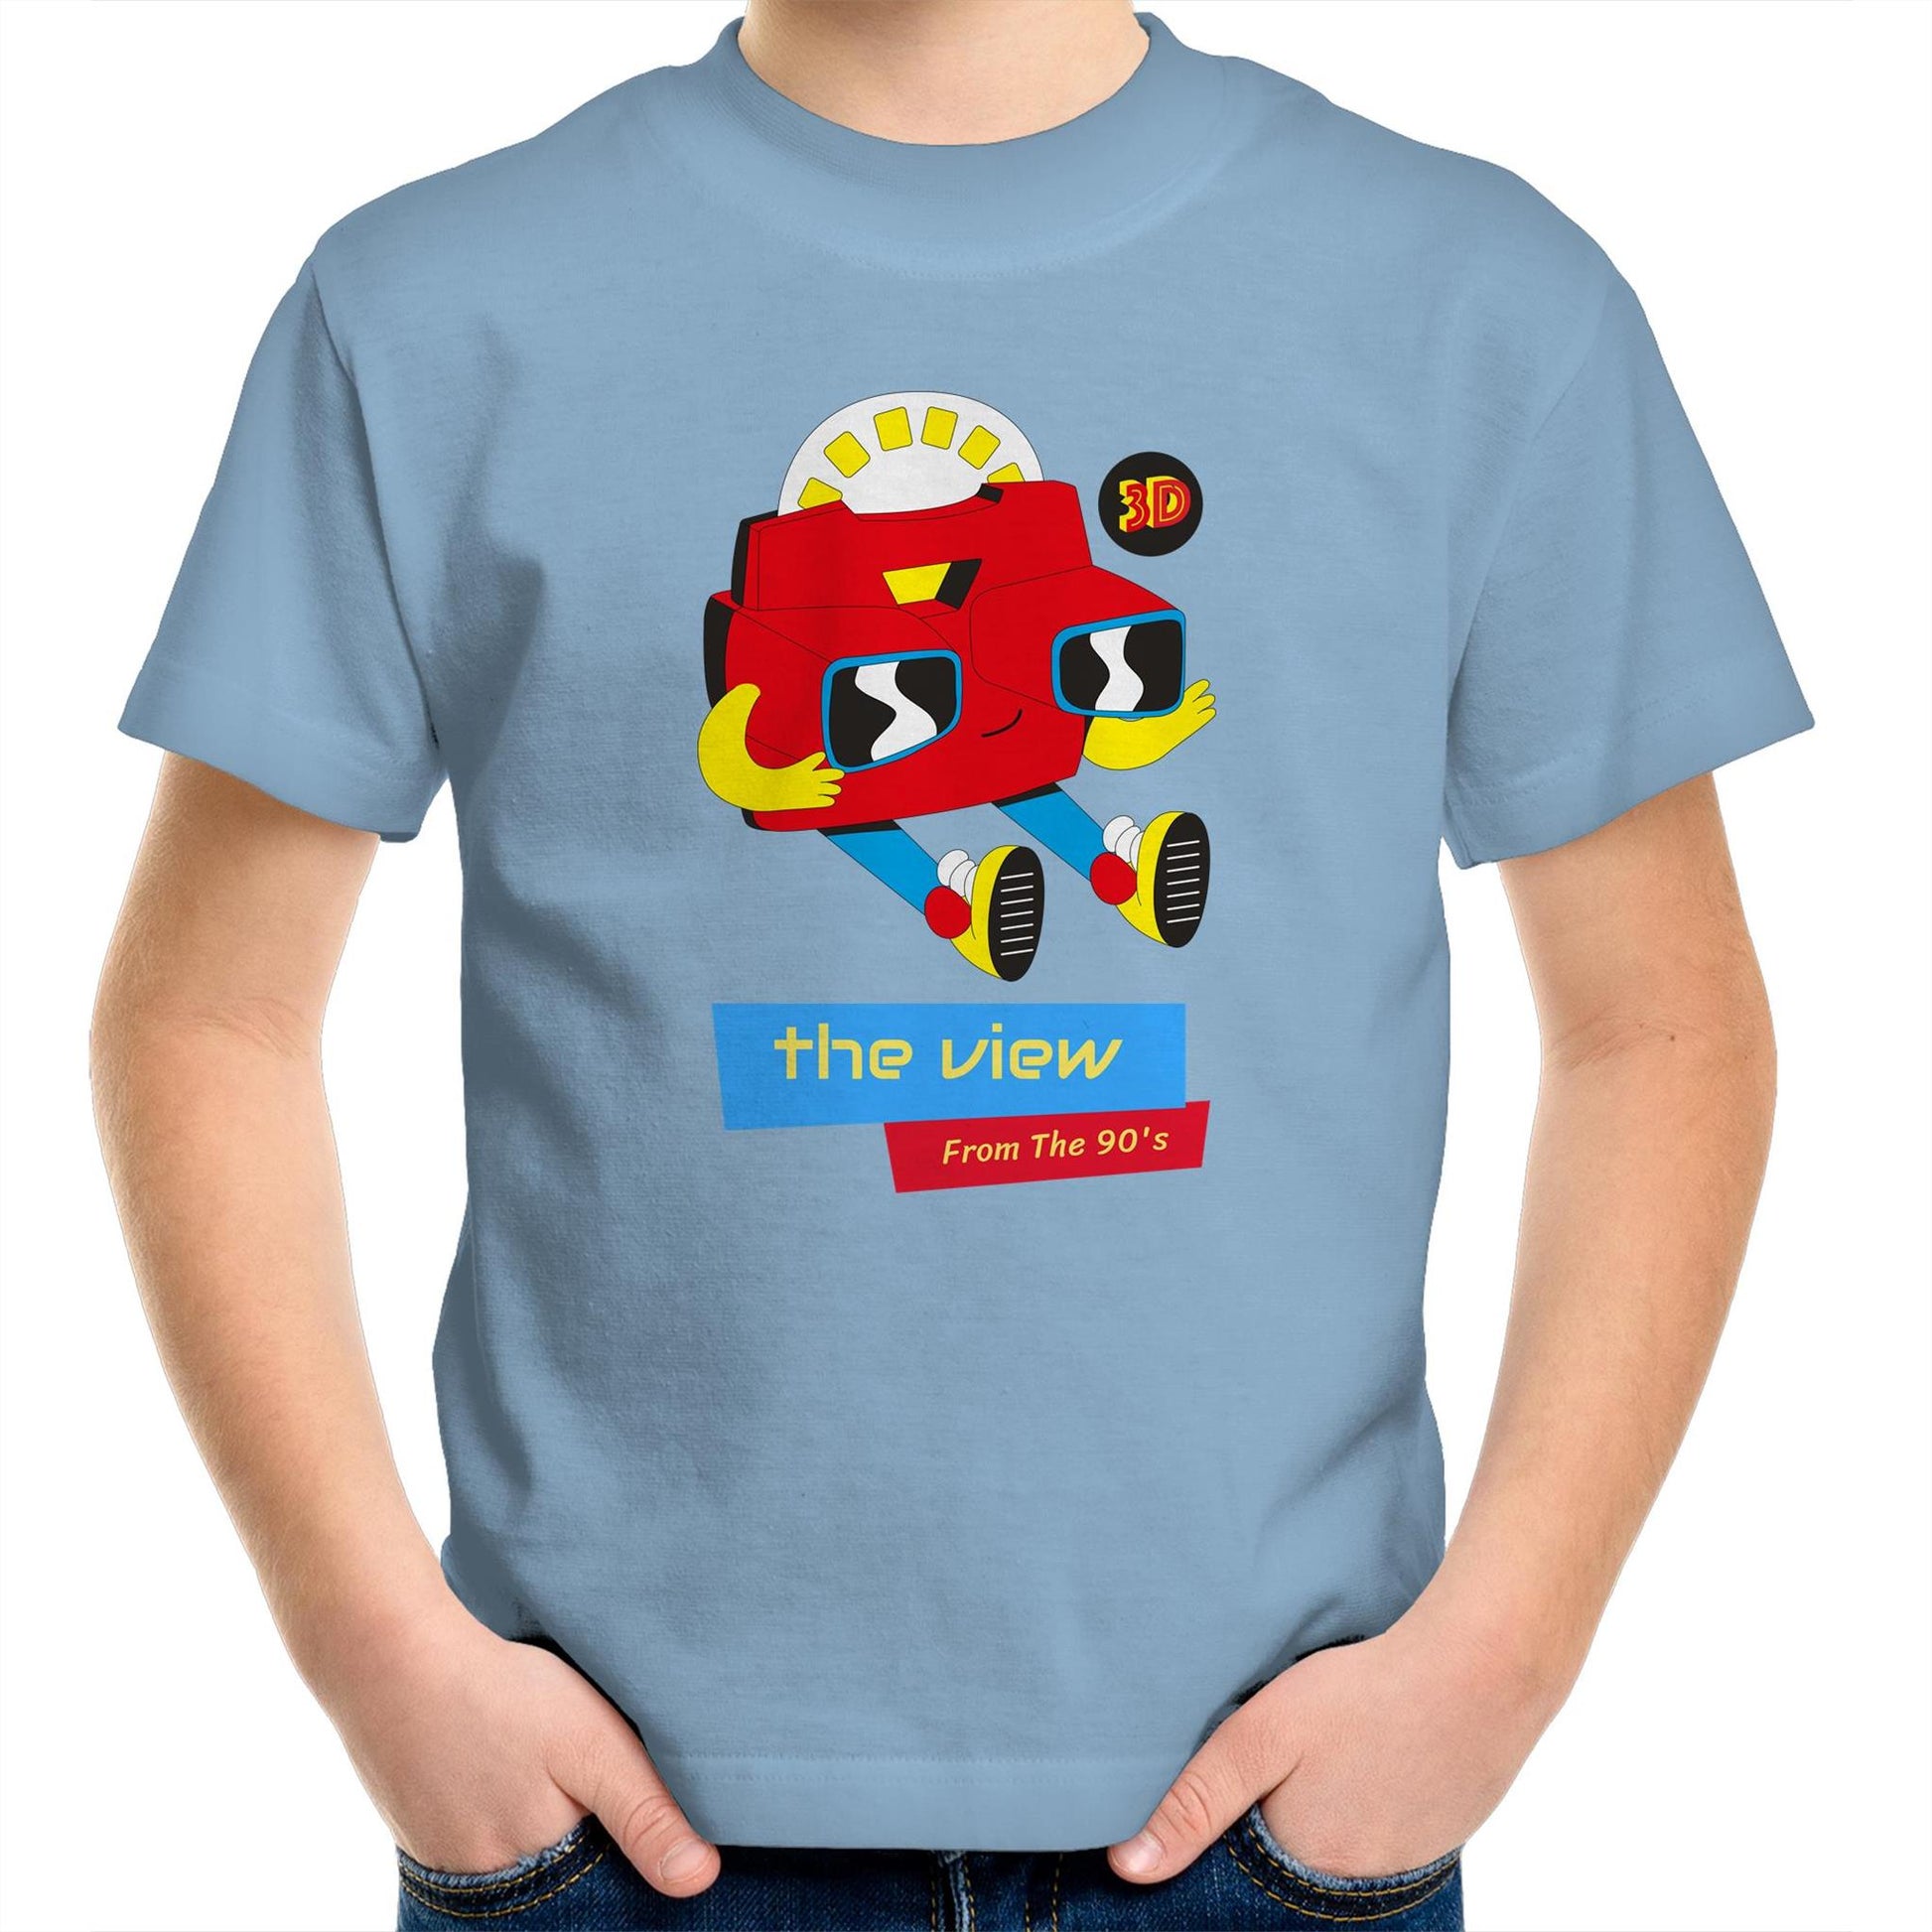 The View From The 90's - Kids Youth Crew T-Shirt Carolina Blue Kids Youth T-shirt Retro